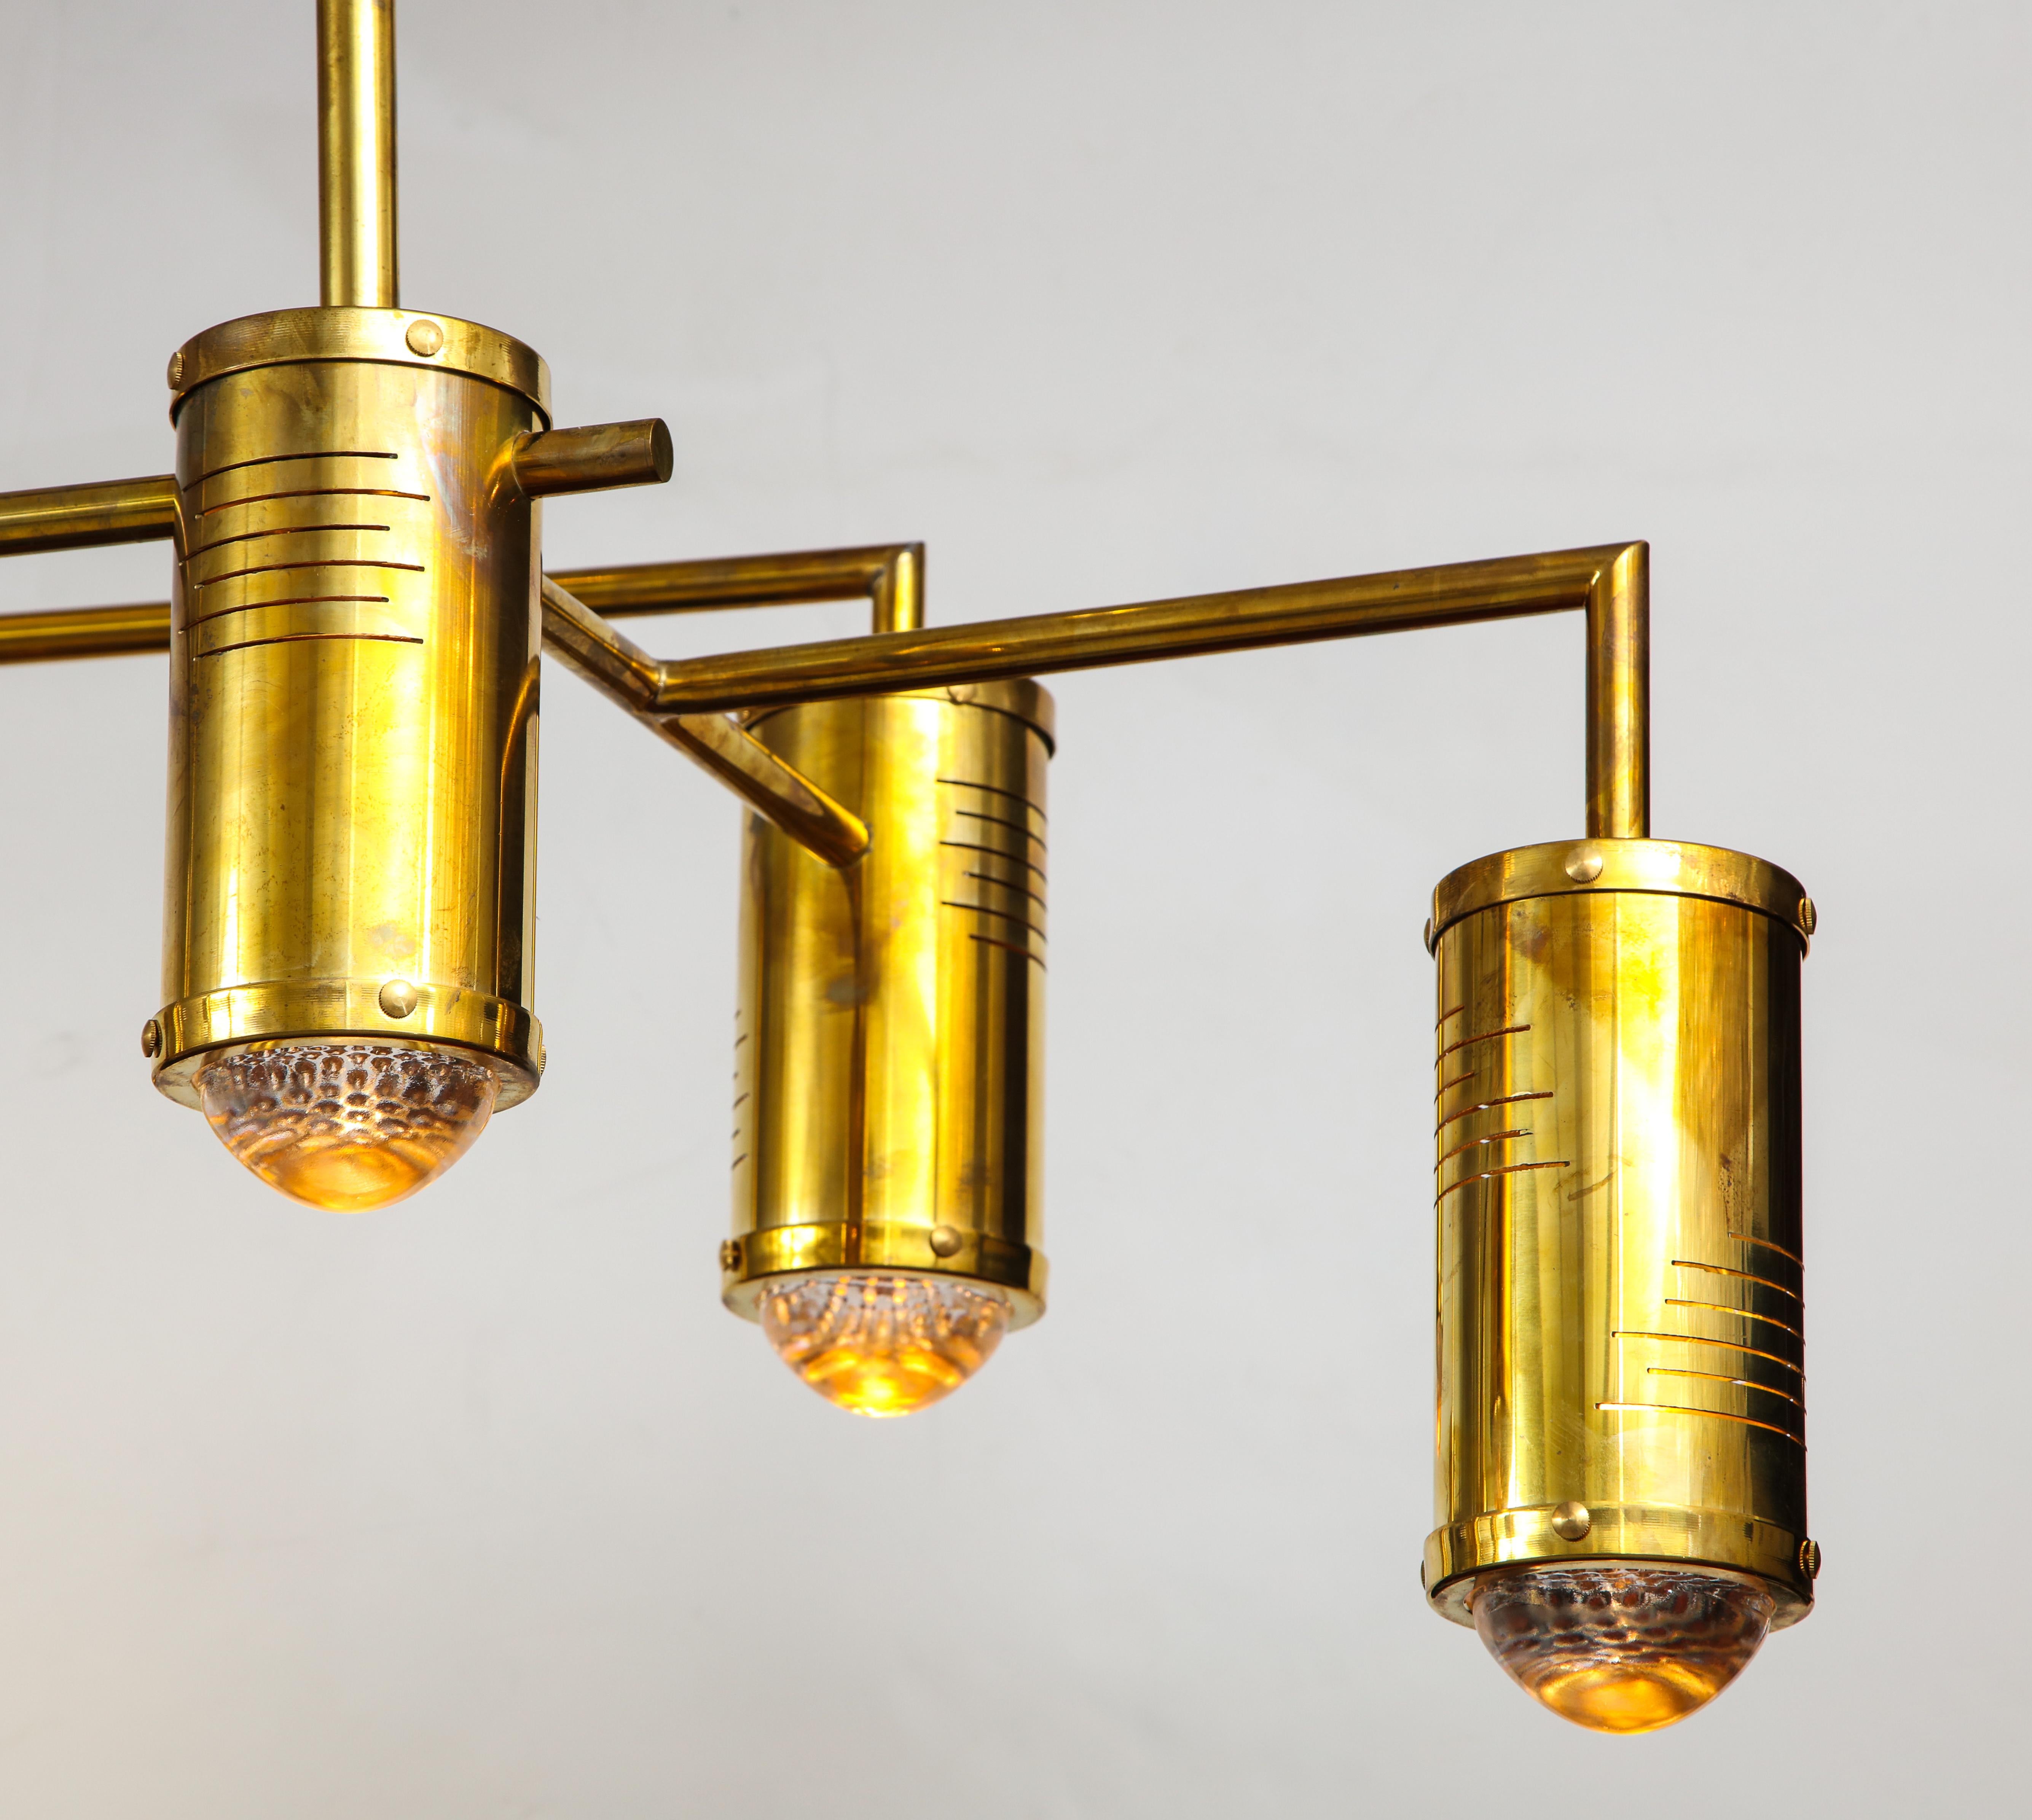 This Italian mid-century modern linear solid brass chandelier is the epitome of chic. Linear natural brass 9-arm frame features cylinder brass lights on multiple levels. Measures 5 ft. wide. Newly wired for U.S. standards utilizing LED lightbulbs.